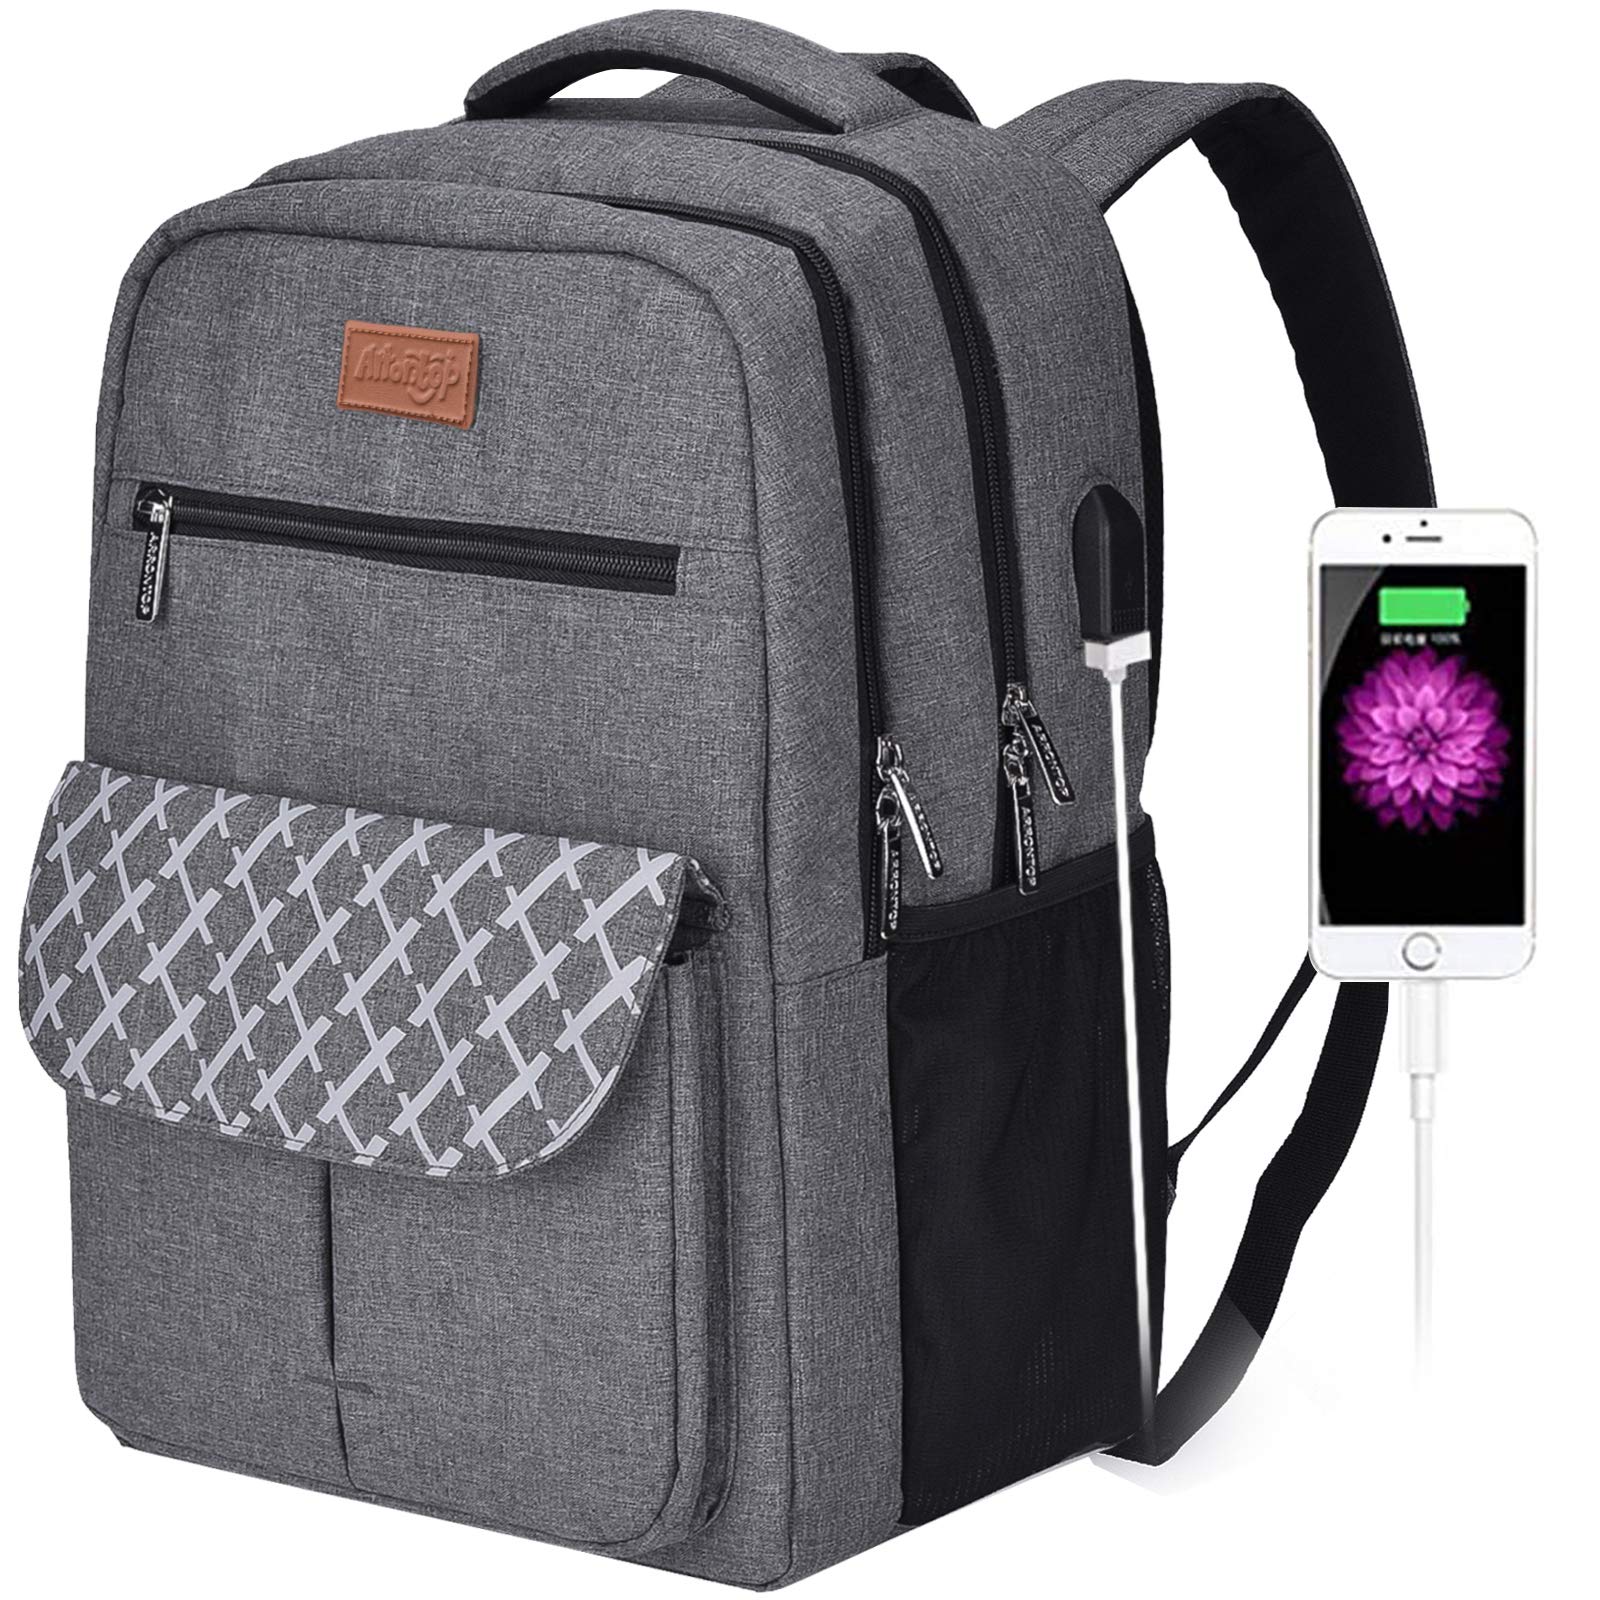 Arrontop Backpacks for College Students, Backpacks for High School,Laptop Backpack Water Resistant Computer Bag with Usb Charging Port